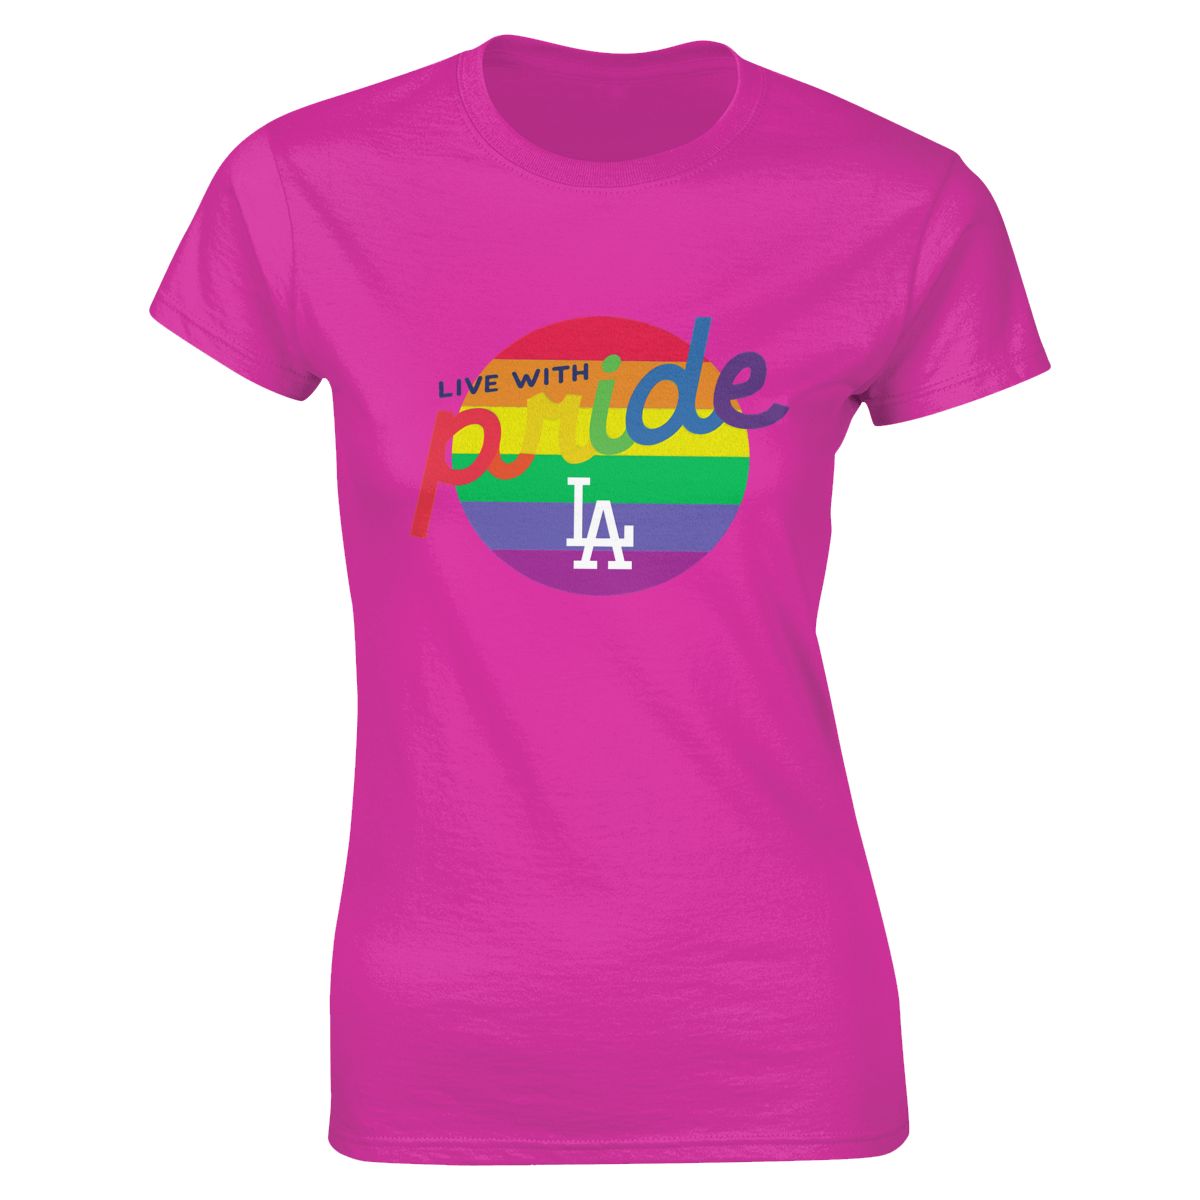 Los Angeles Dodgers Round LGBT Lettering Women's Short-Sleeve Cotton Tee